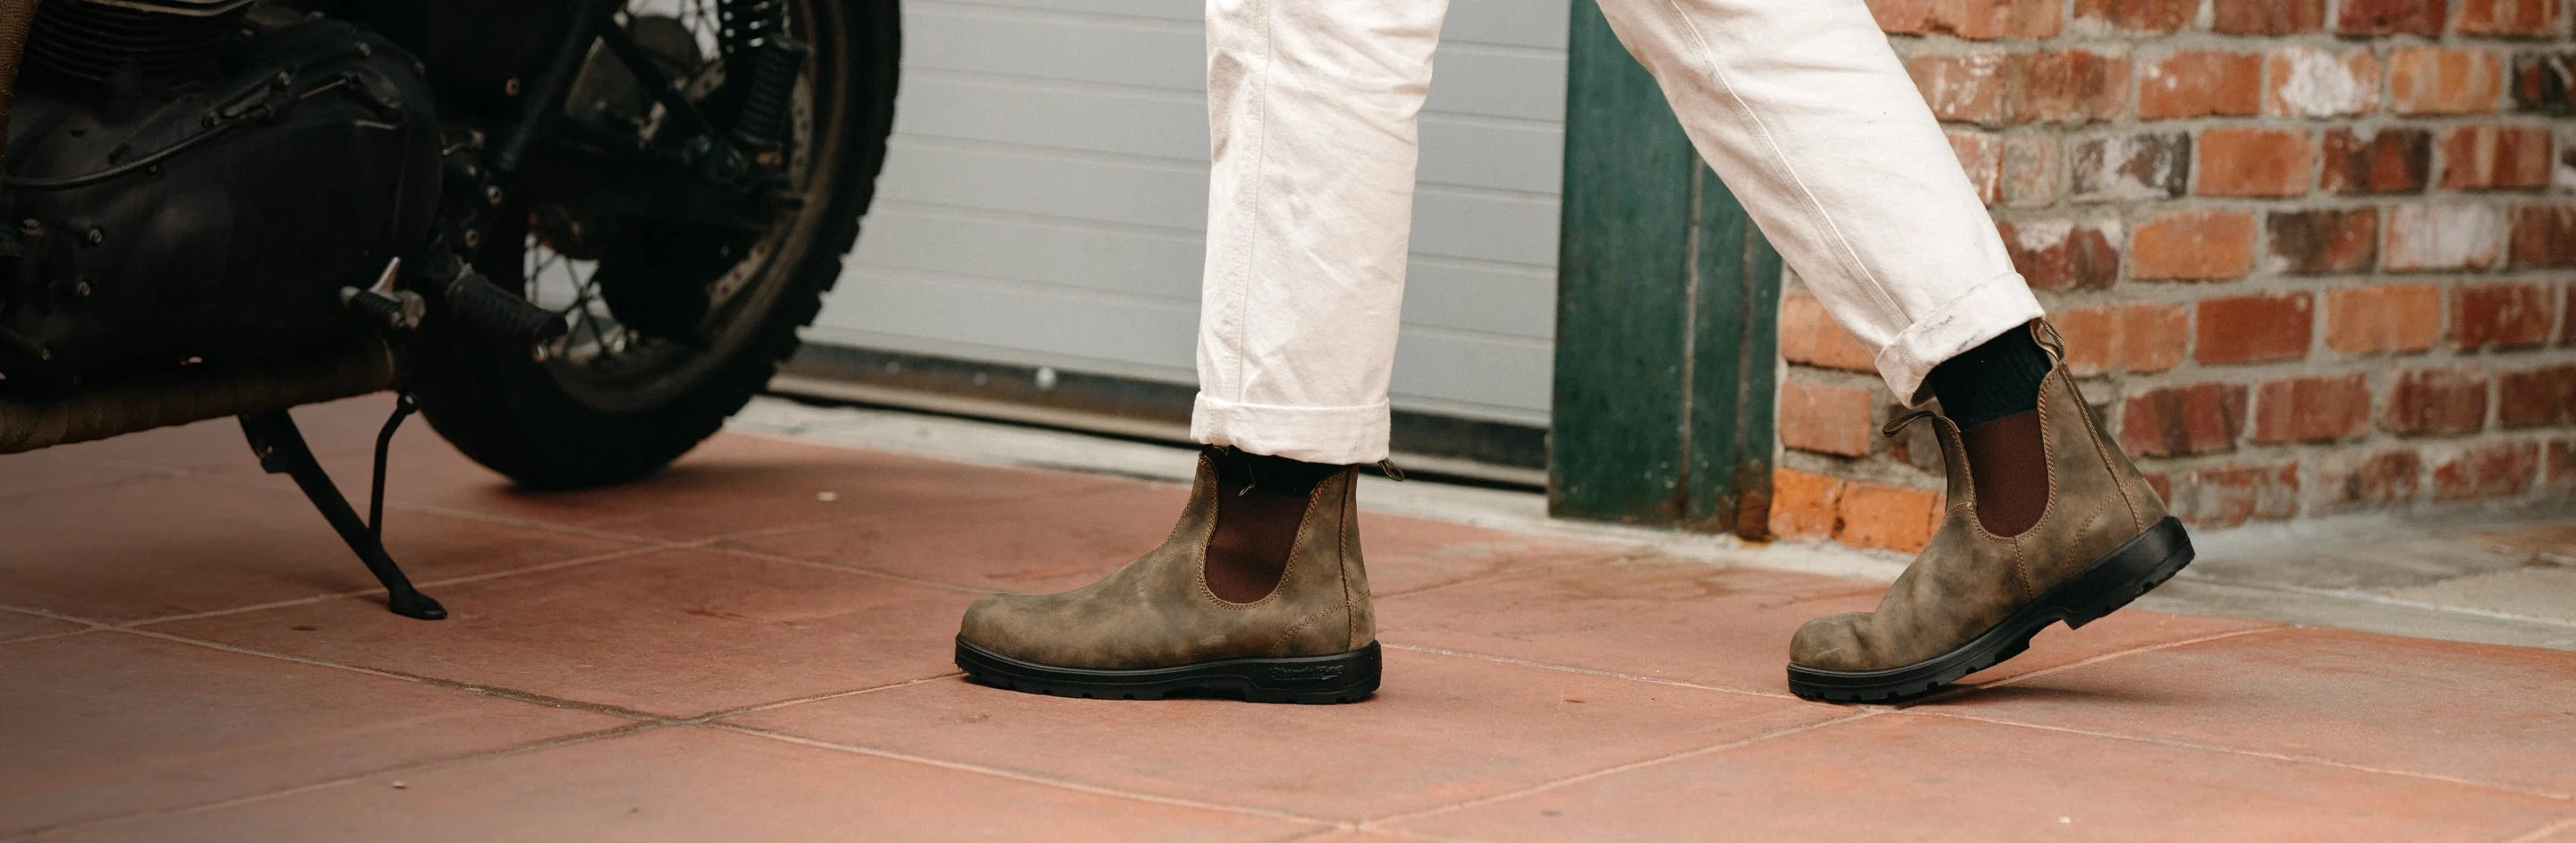 Chelsea Boots - Upperclass Fashions 